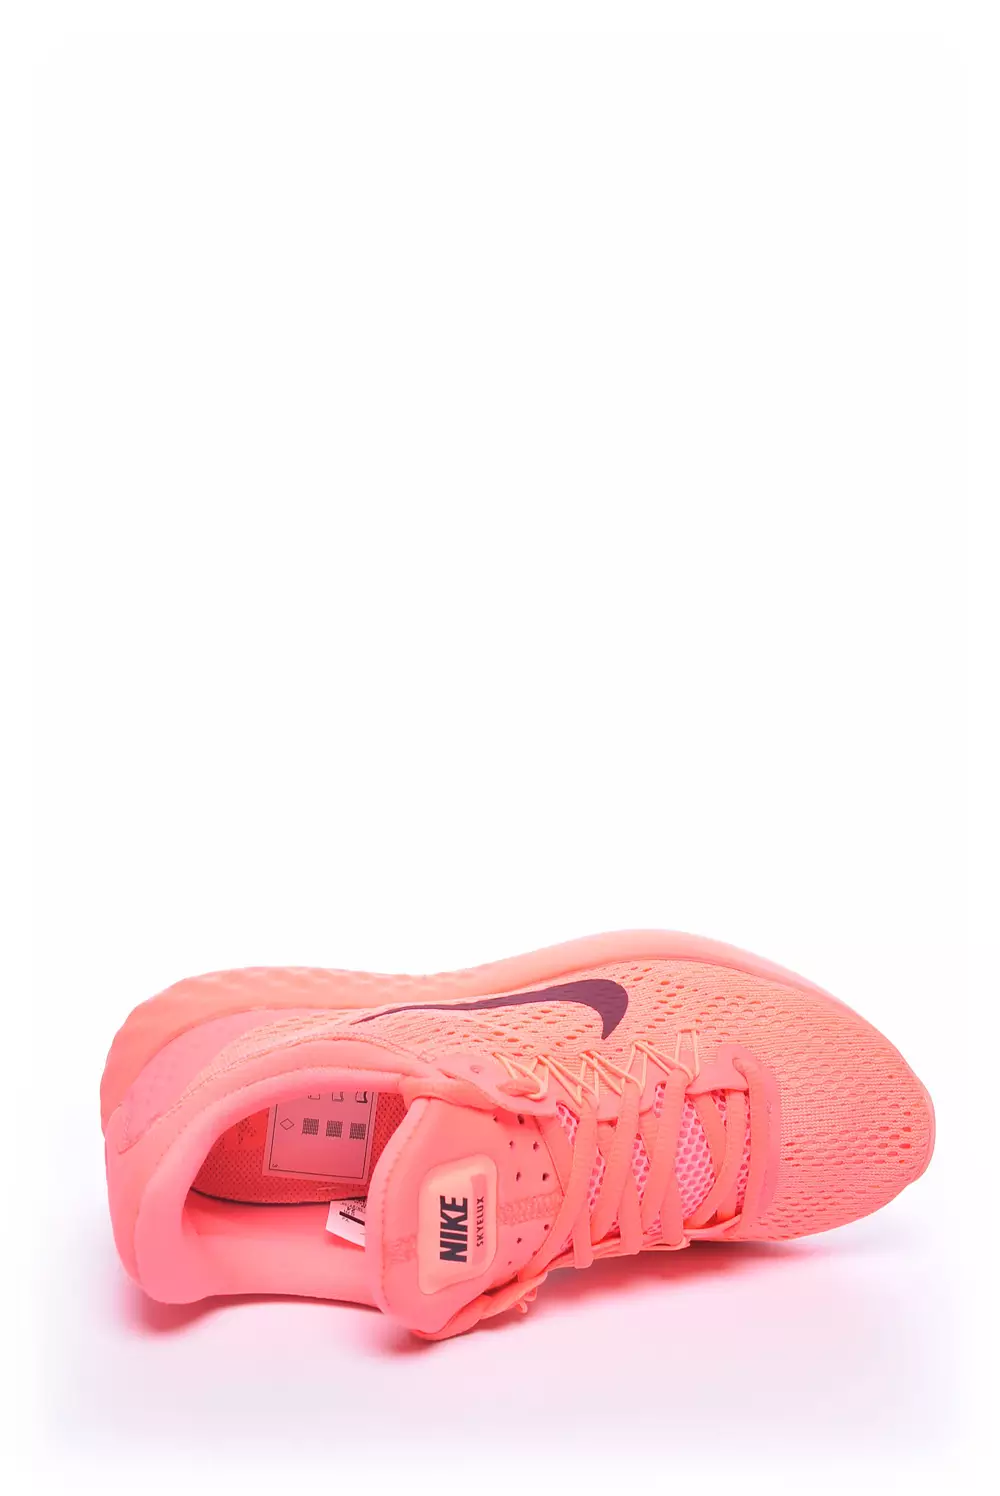 Revision King Lear Prominent Sneakers dama Lunar Skyelux - Nike | Shoemix.ro